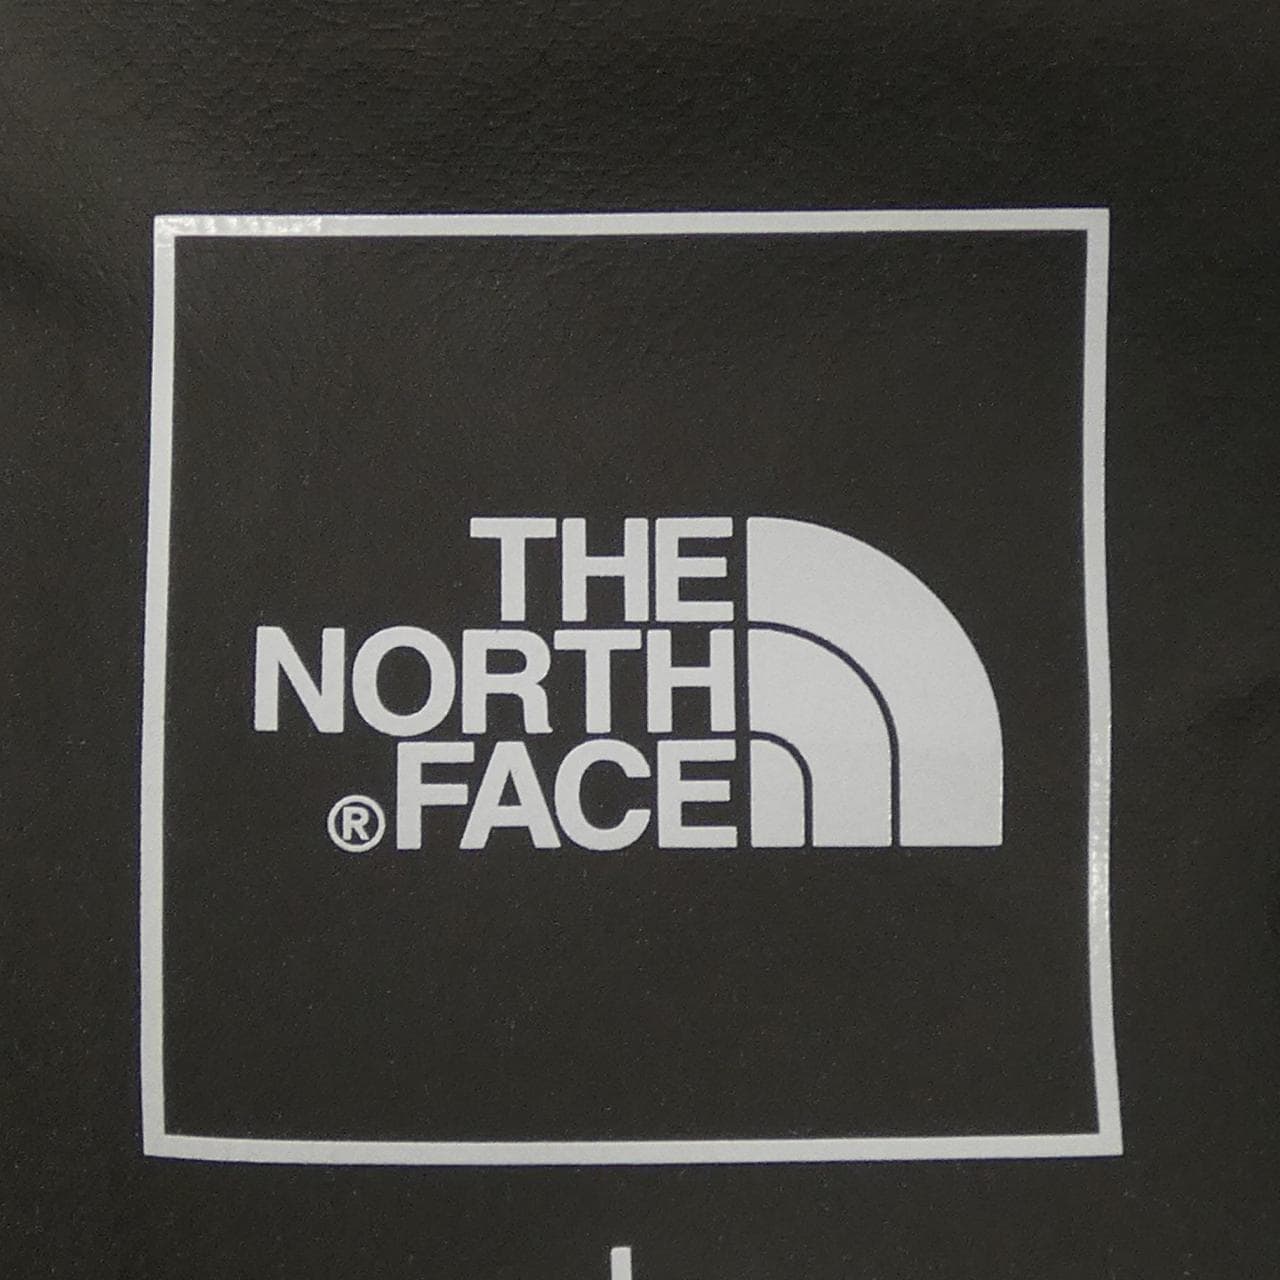 The North Face THE NORTH FACE blouson